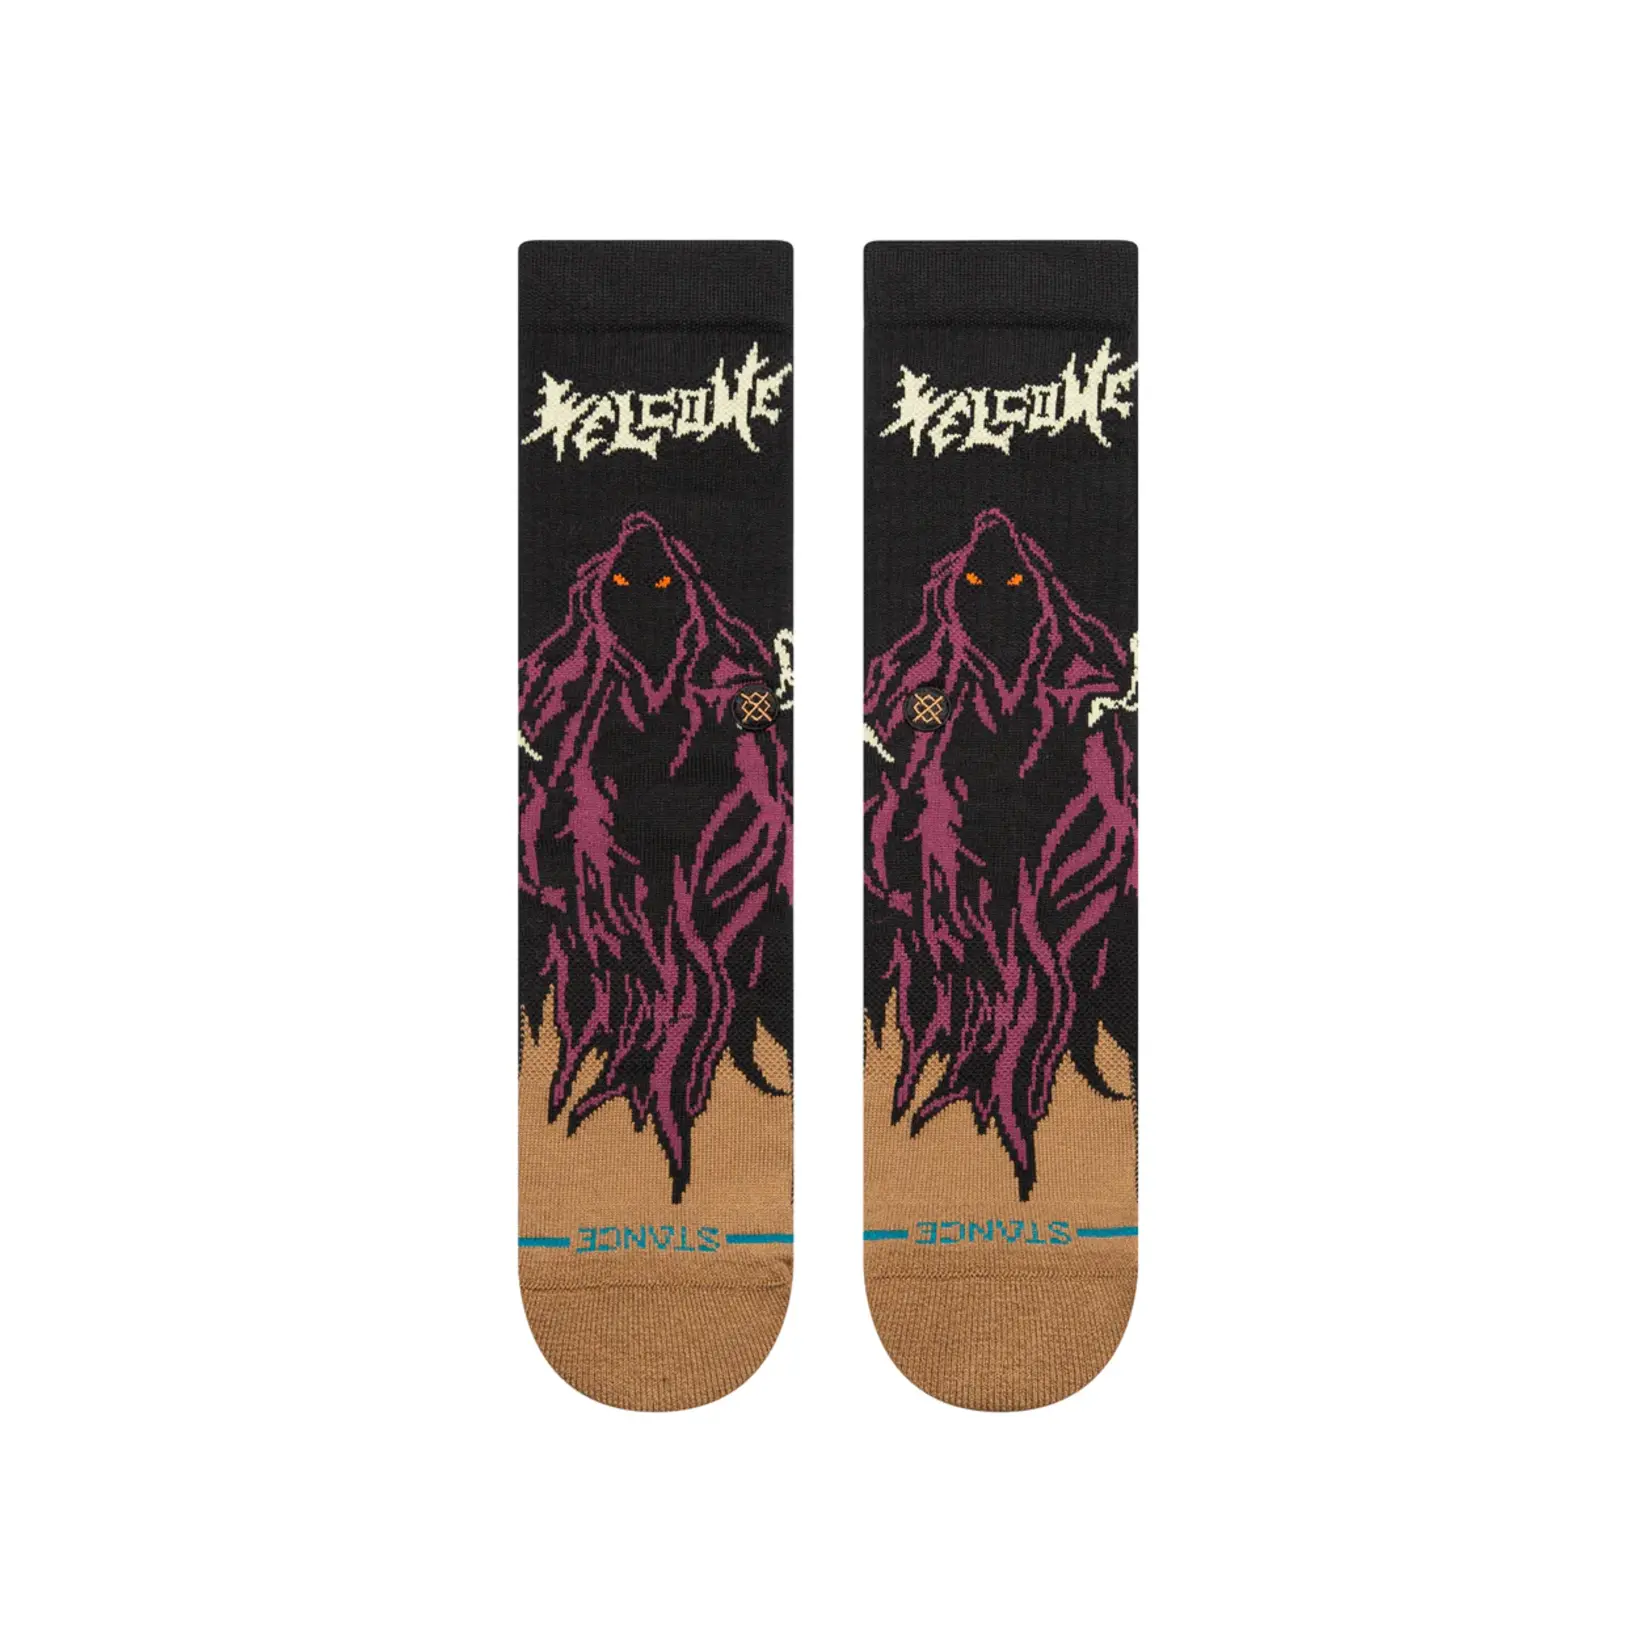 Stance Stance x Welcome Skateboards Skelly Crew